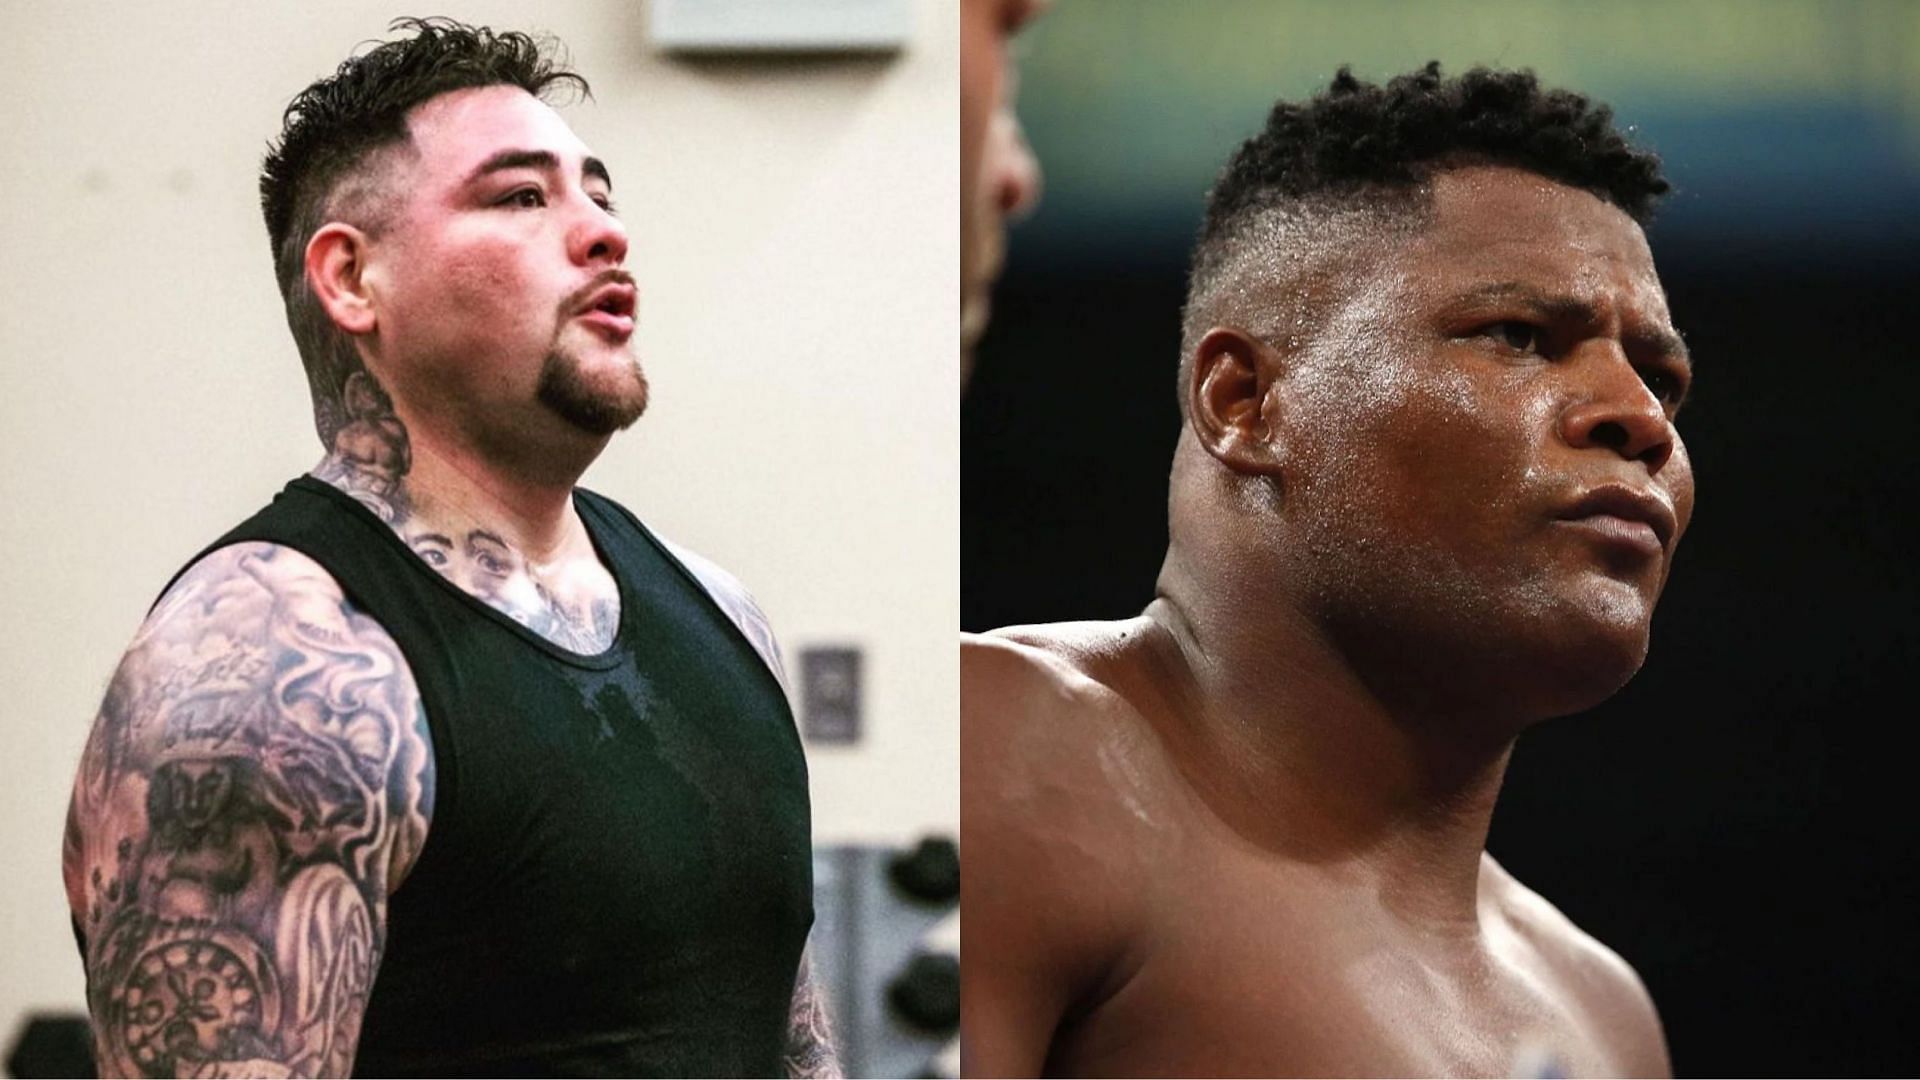 Andy Ruiz Jr. (left, @andy_destroyer13), Luis Ortiz (right) [images courtesy of Instagram and Getty]